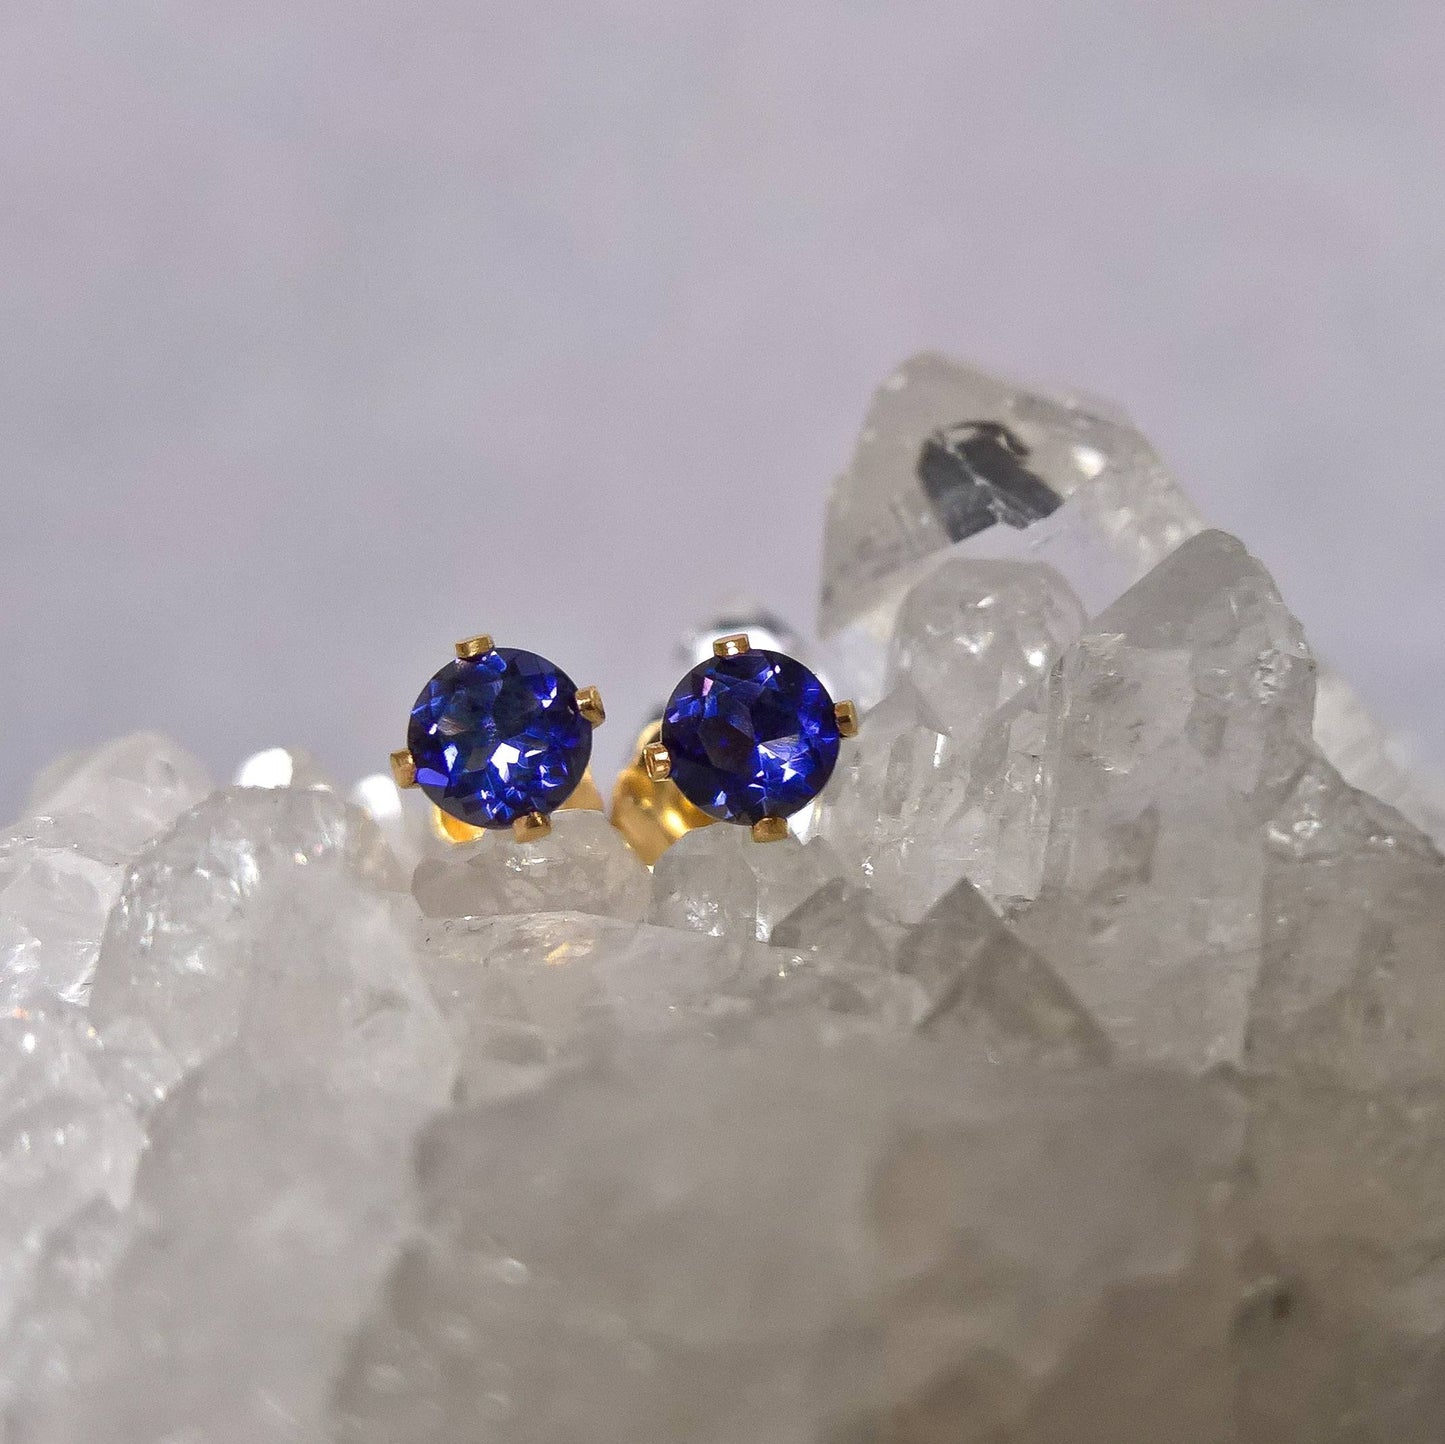 Iolite earrings stud - sterling silver or gold fill 4mm size